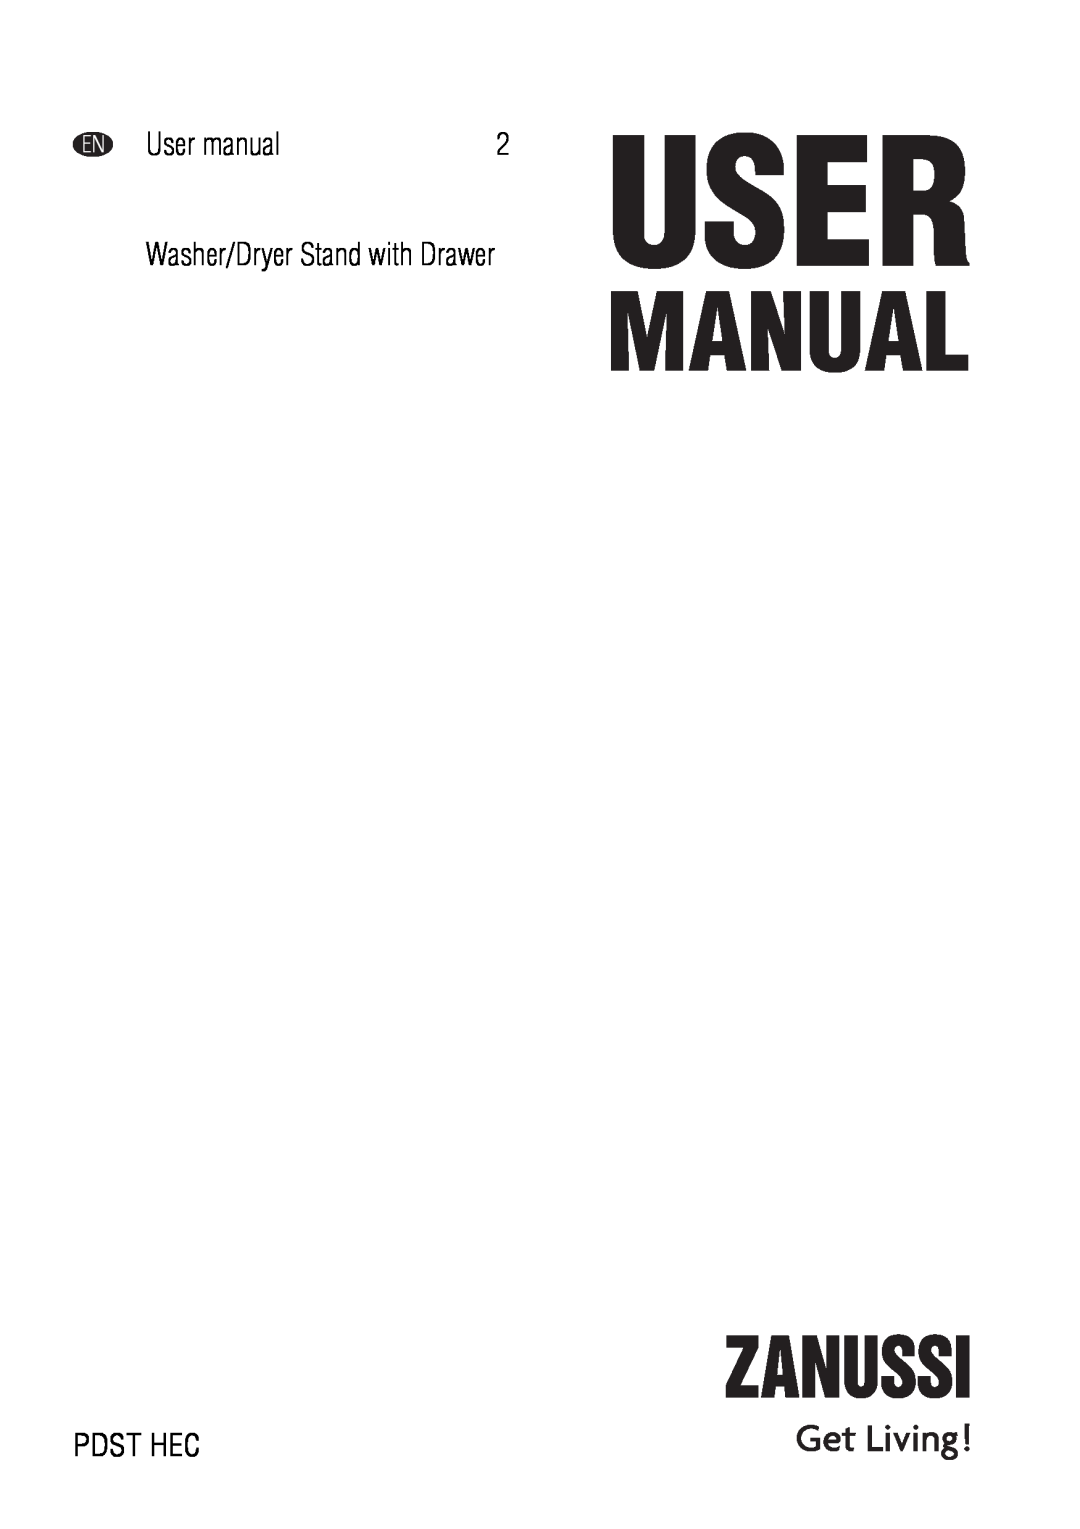 Zanussi user manual User manual, Washer/Dryer Stand with Drawer, Pdst Hec 